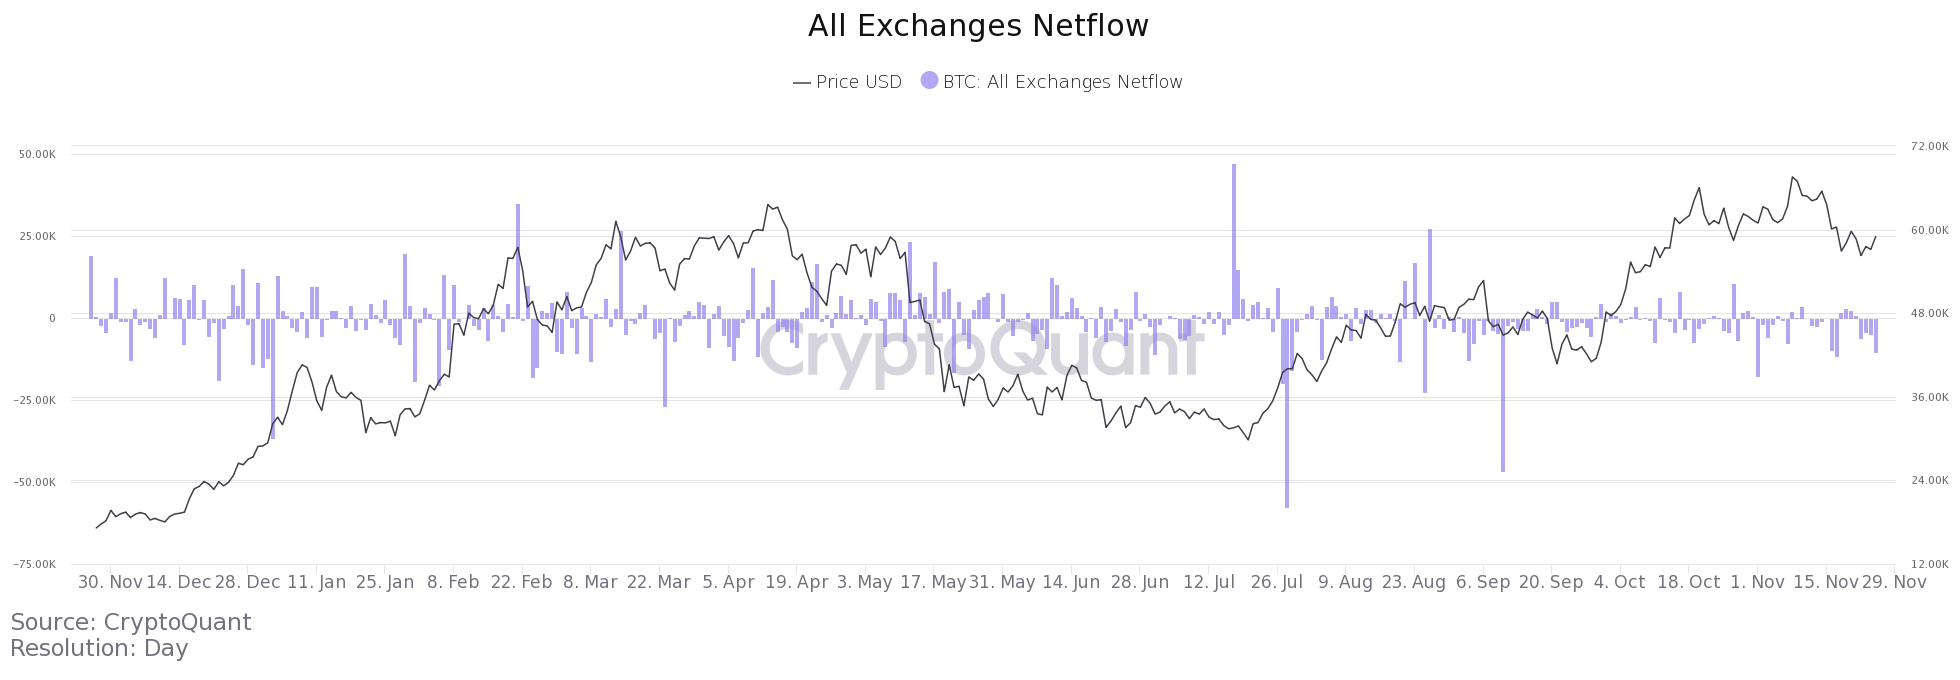 BTC all exchanges netflow chart